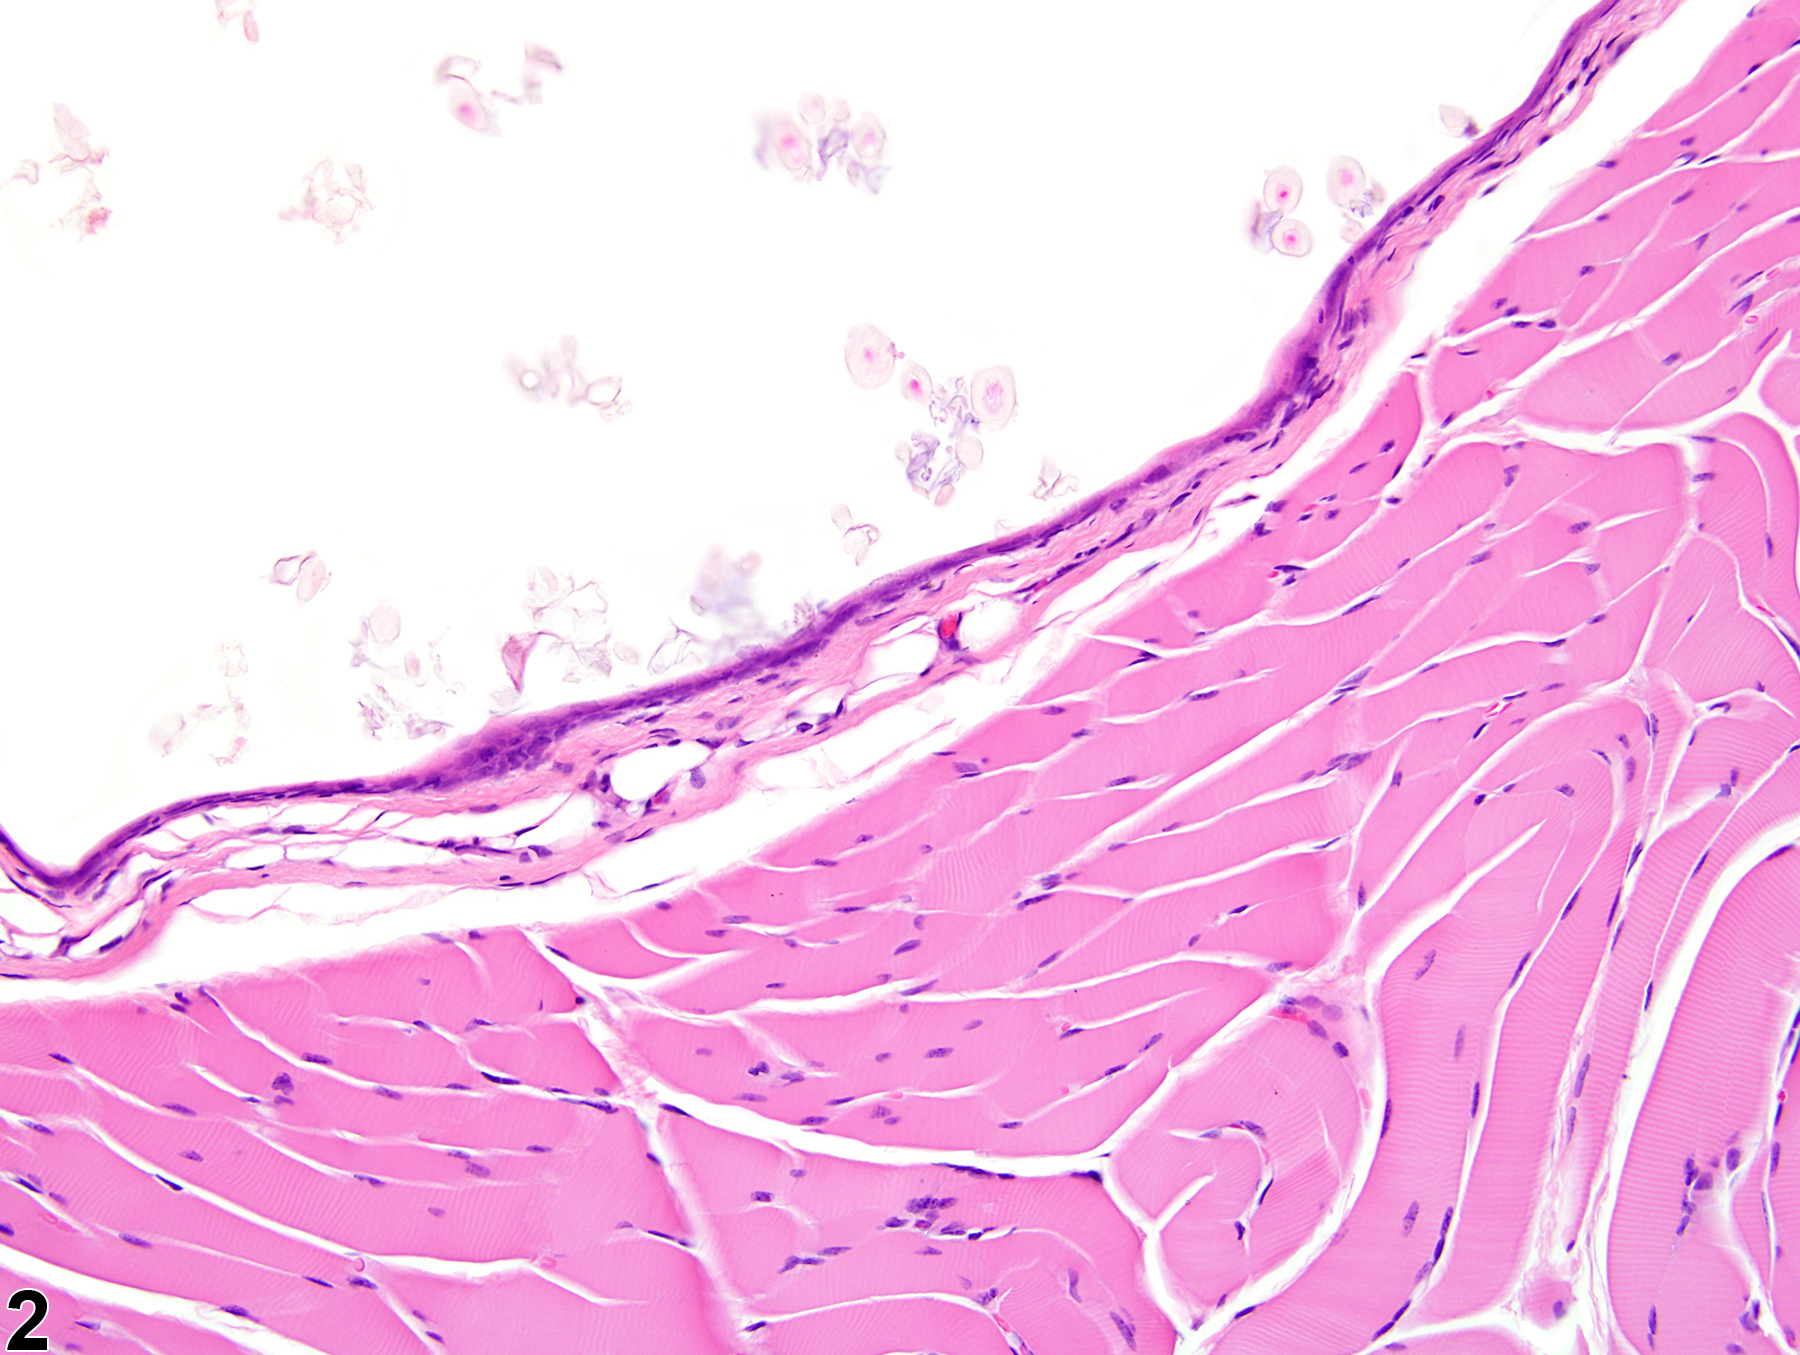 Image of cyst in the skeletal muscle from a female F344/N rat in a chronic study